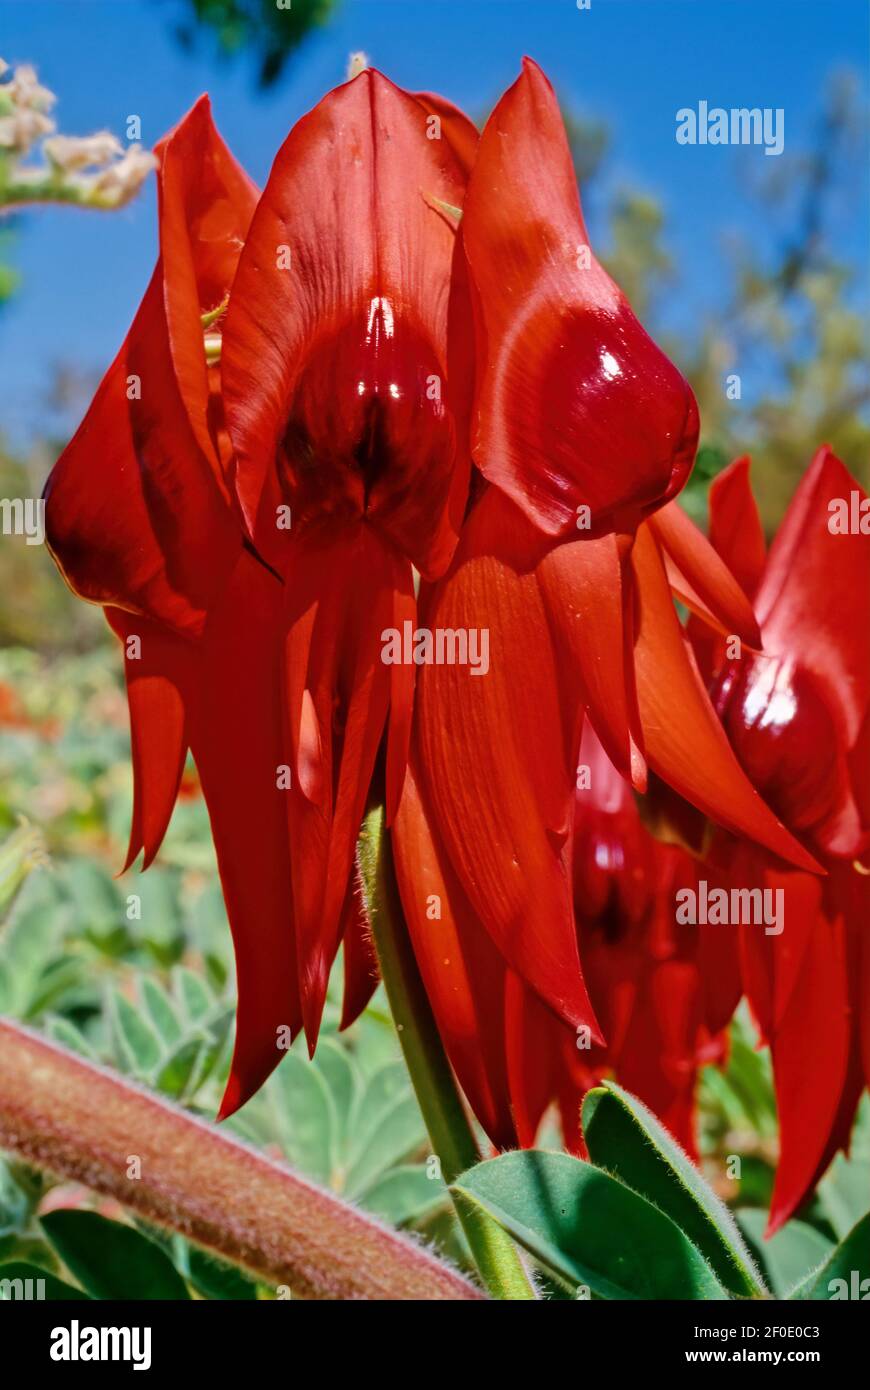 Swainsona formosa, Sturt's desert pea, is an Australian plant in the genus Swainsona, named after English botanist Isaac Swainson, famous for its dist Stock Photo